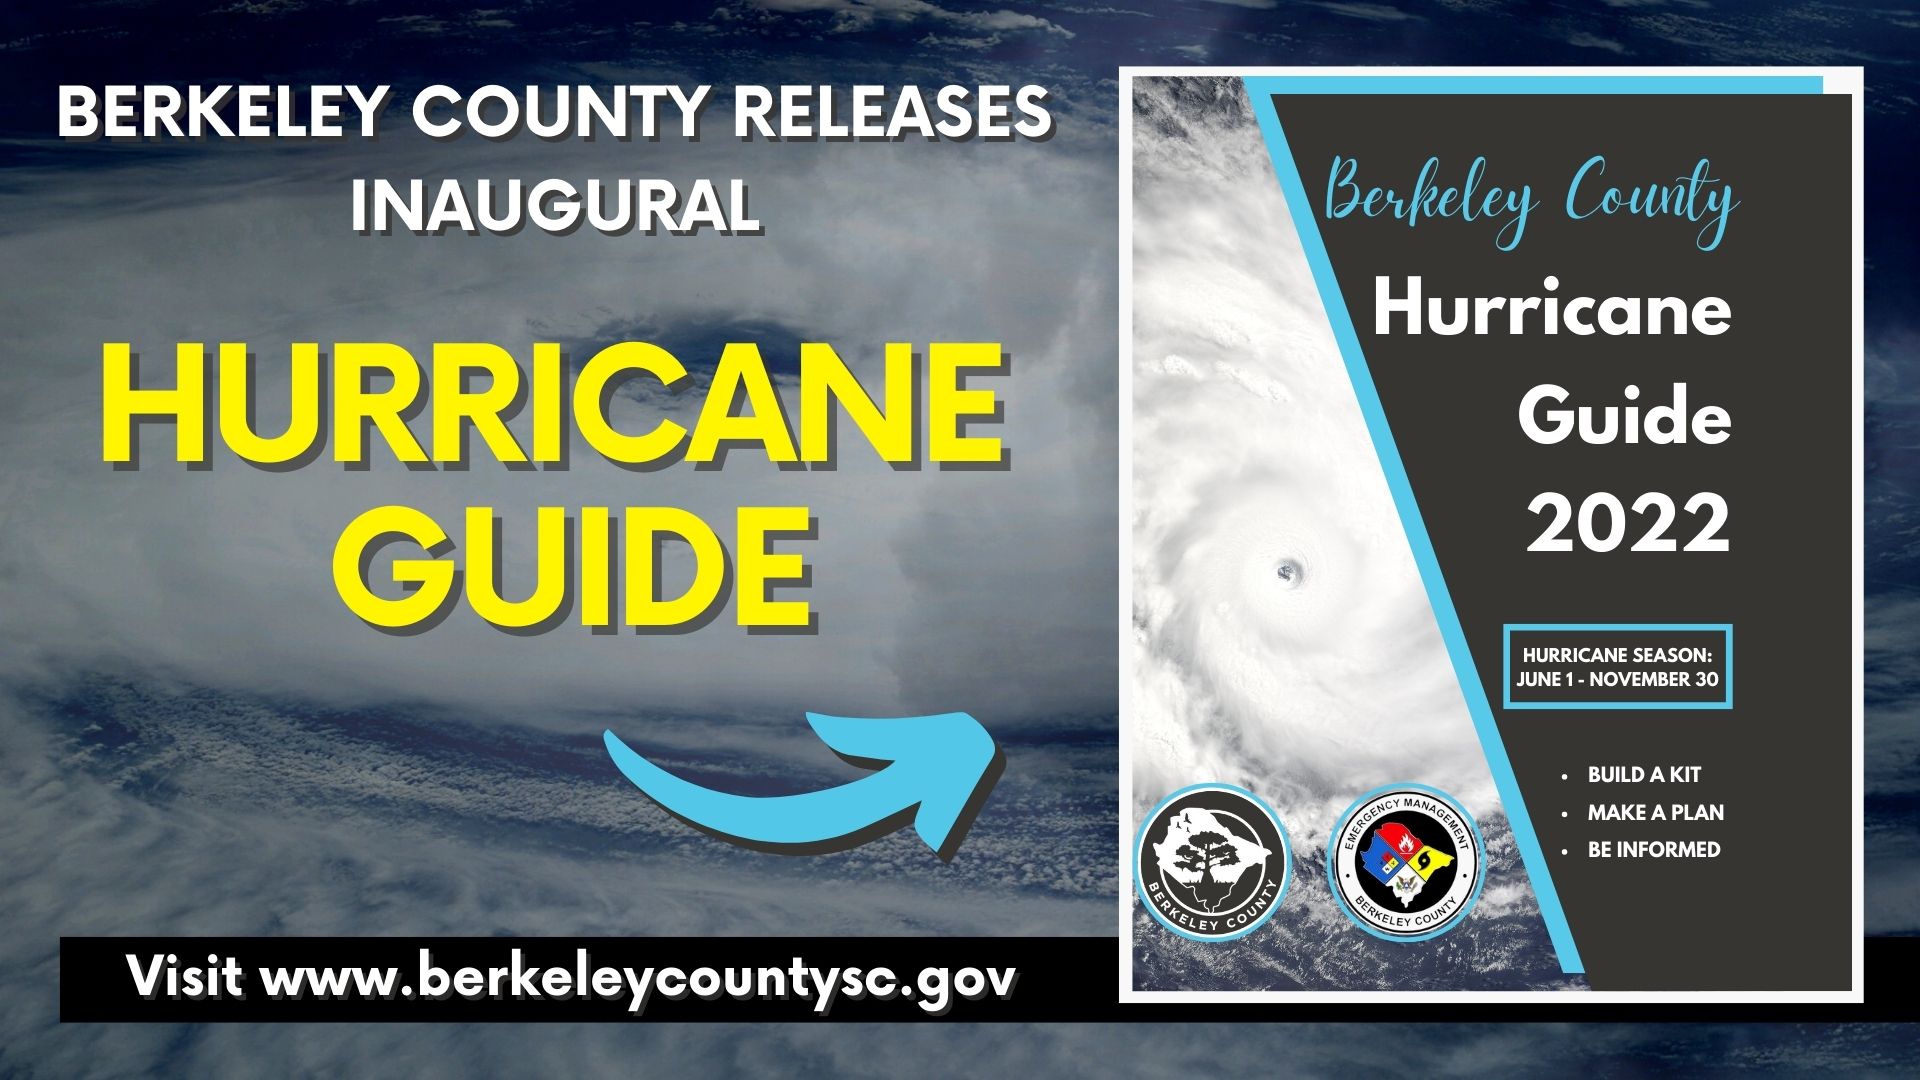 Berkeley County Publishes Inaugural Hurricane Guide for 2022 Storm Season